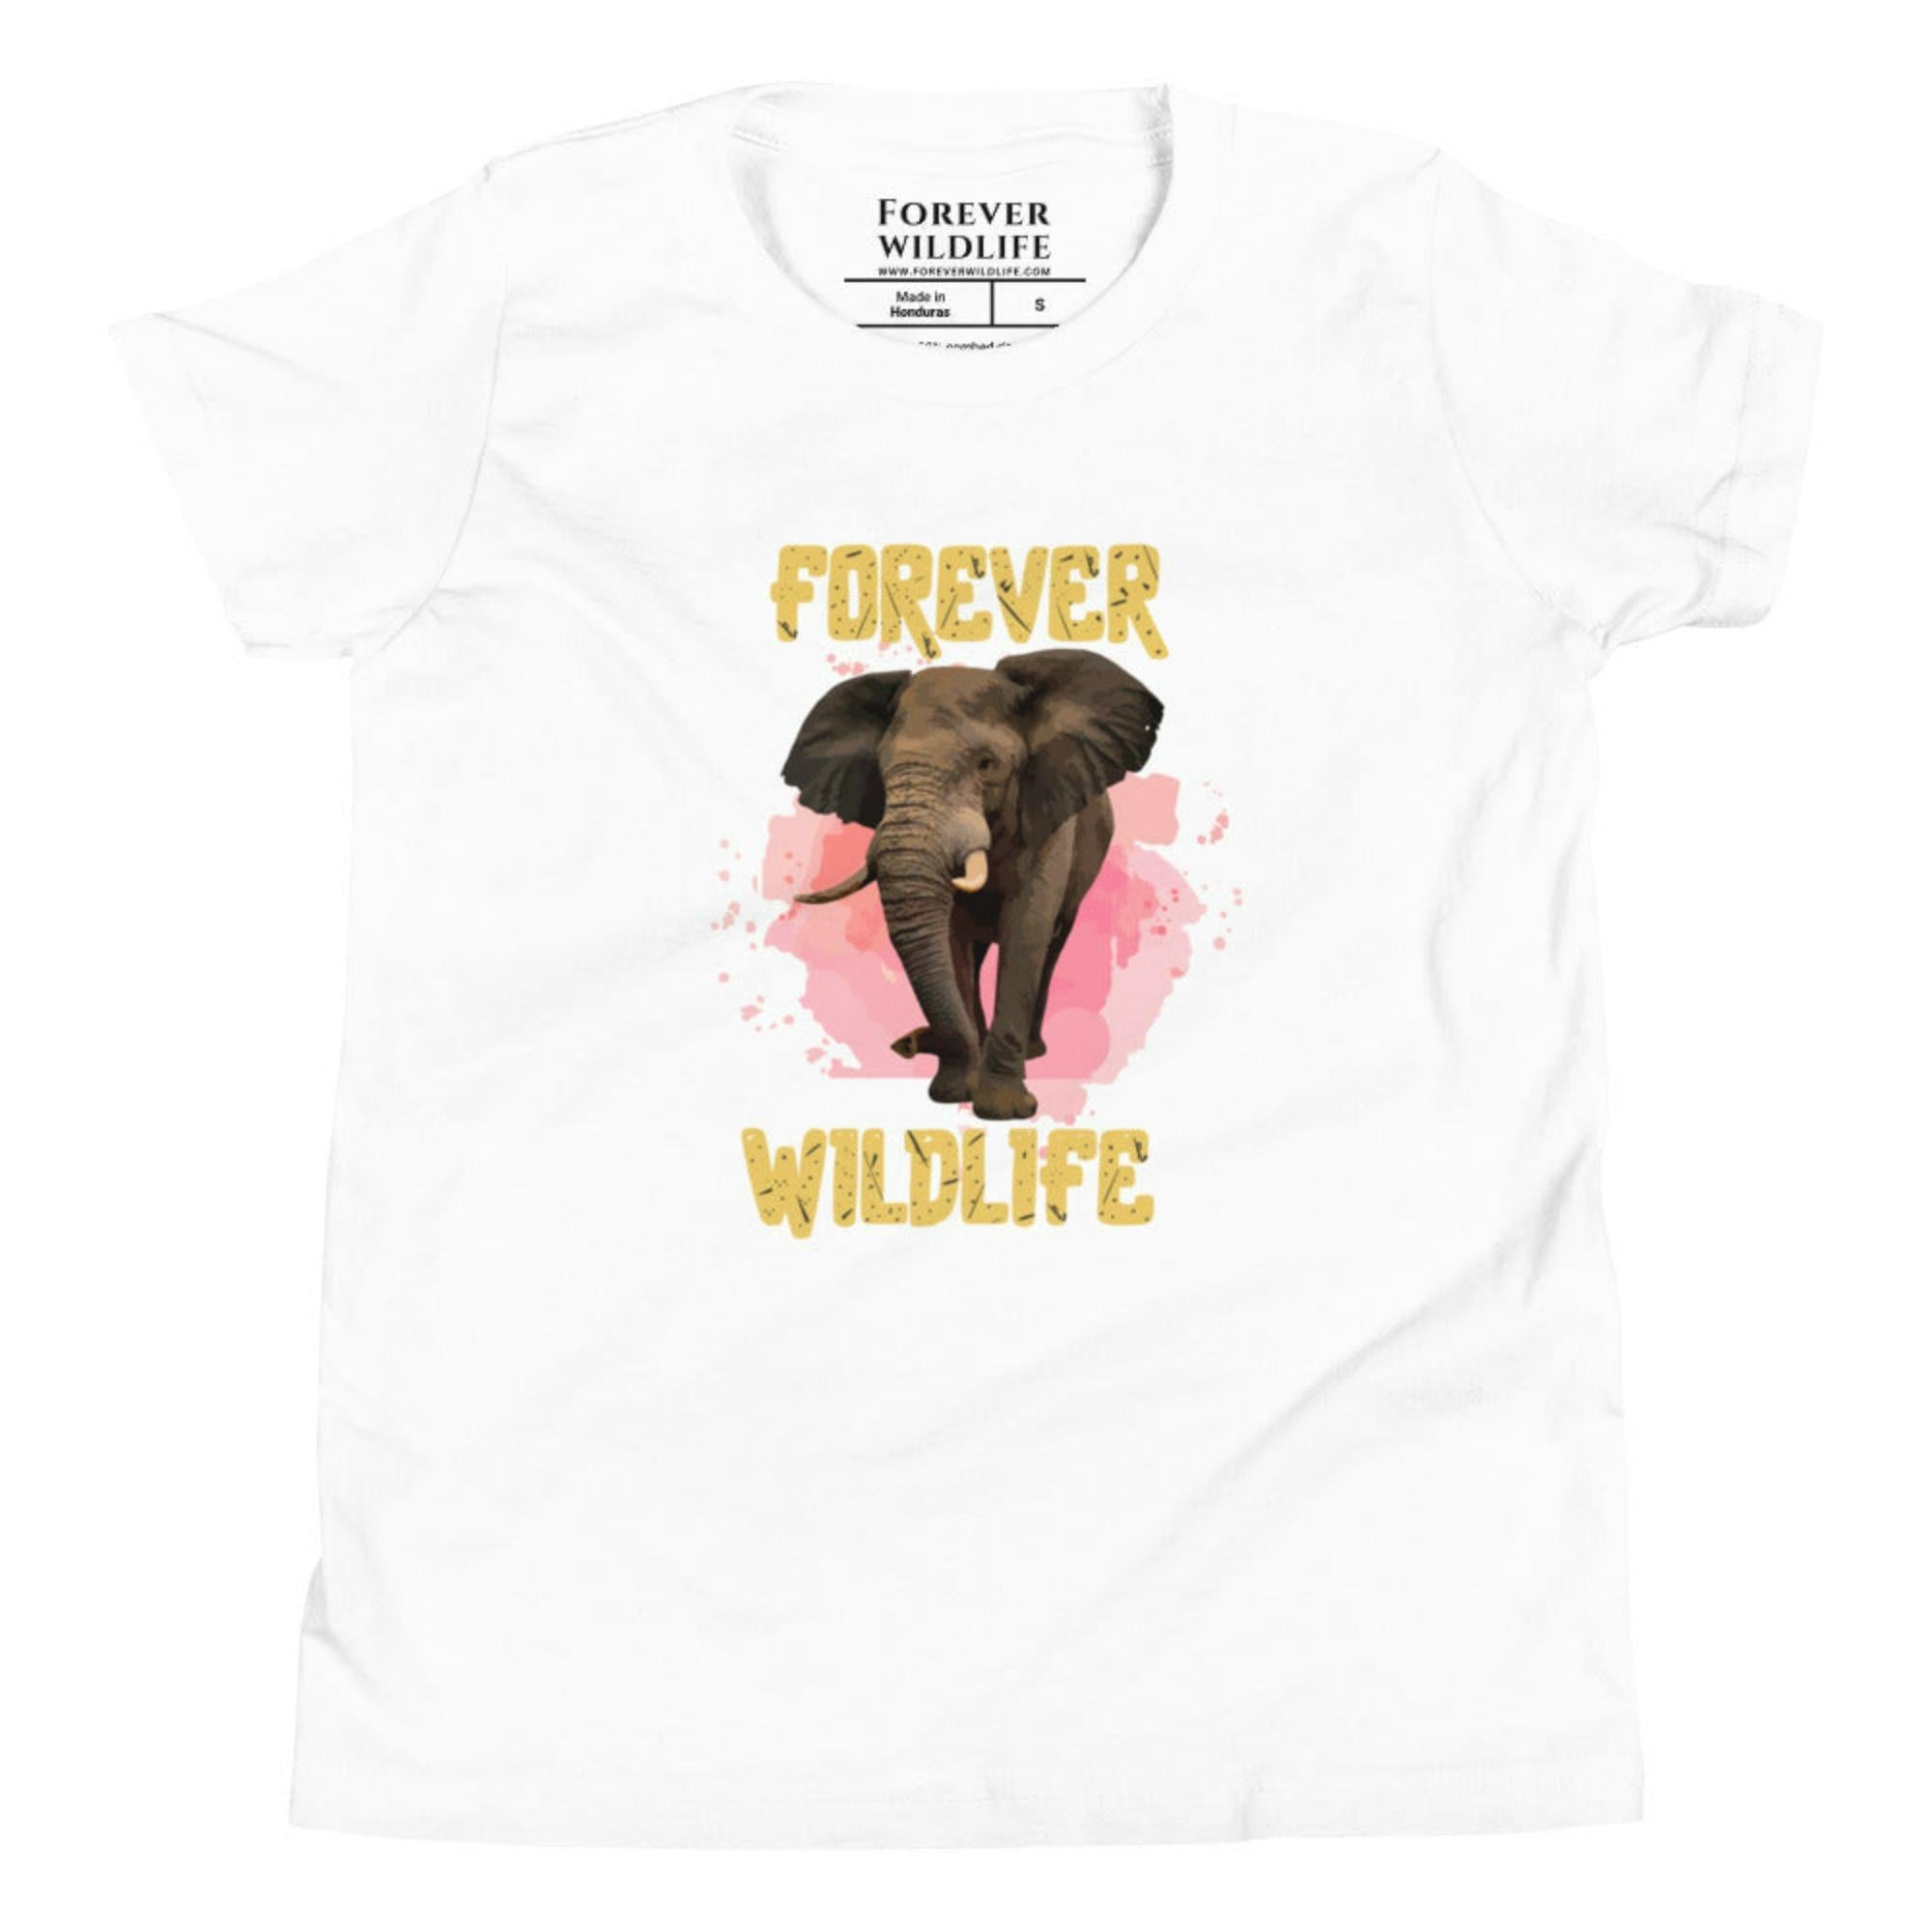 White Youth T-Shirt with Elephant graphic as part of Wildlife T Shirts, Wildlife Clothing & Apparel by Forever Wildlife